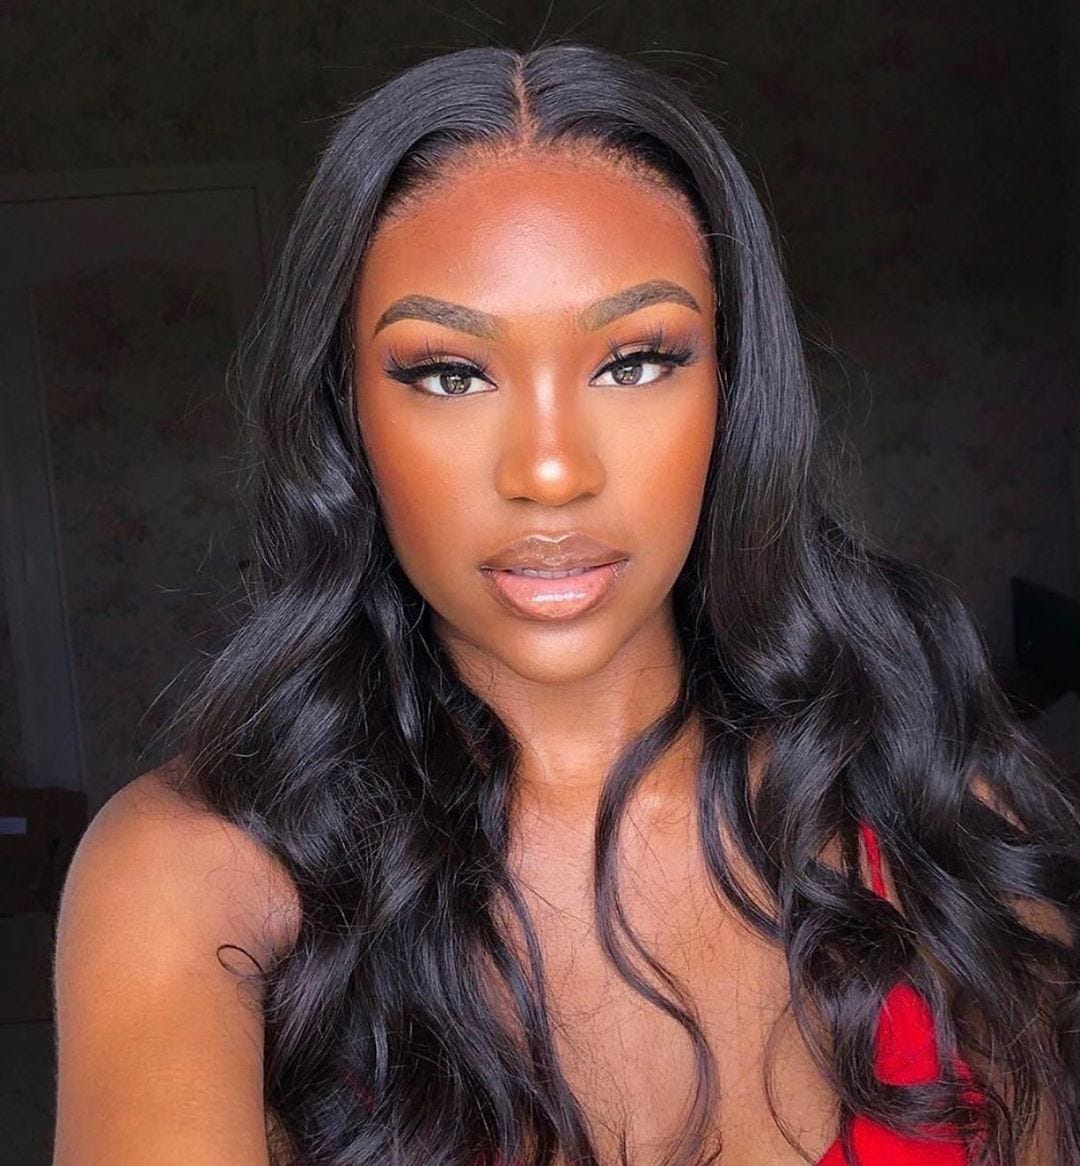 How to Install Hair Bundles With Lace Closure?, by Ayana Anderson